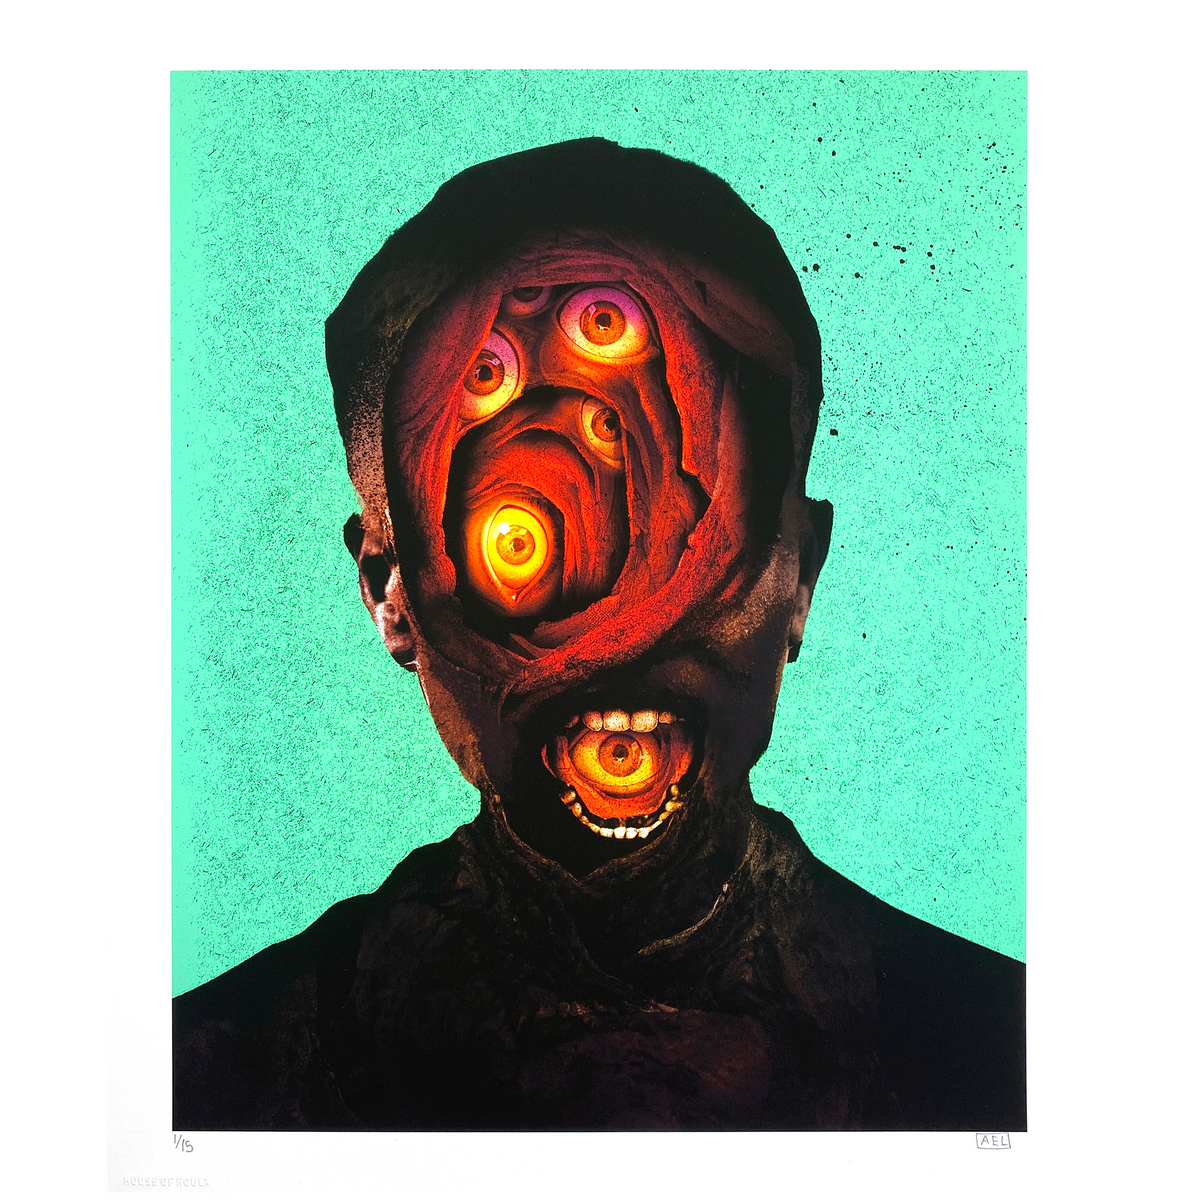 Alex Eckman-Lawn &quot;All Eyes&quot; - Archival Print, Limited Edition of 15 - 14 x 17&quot;